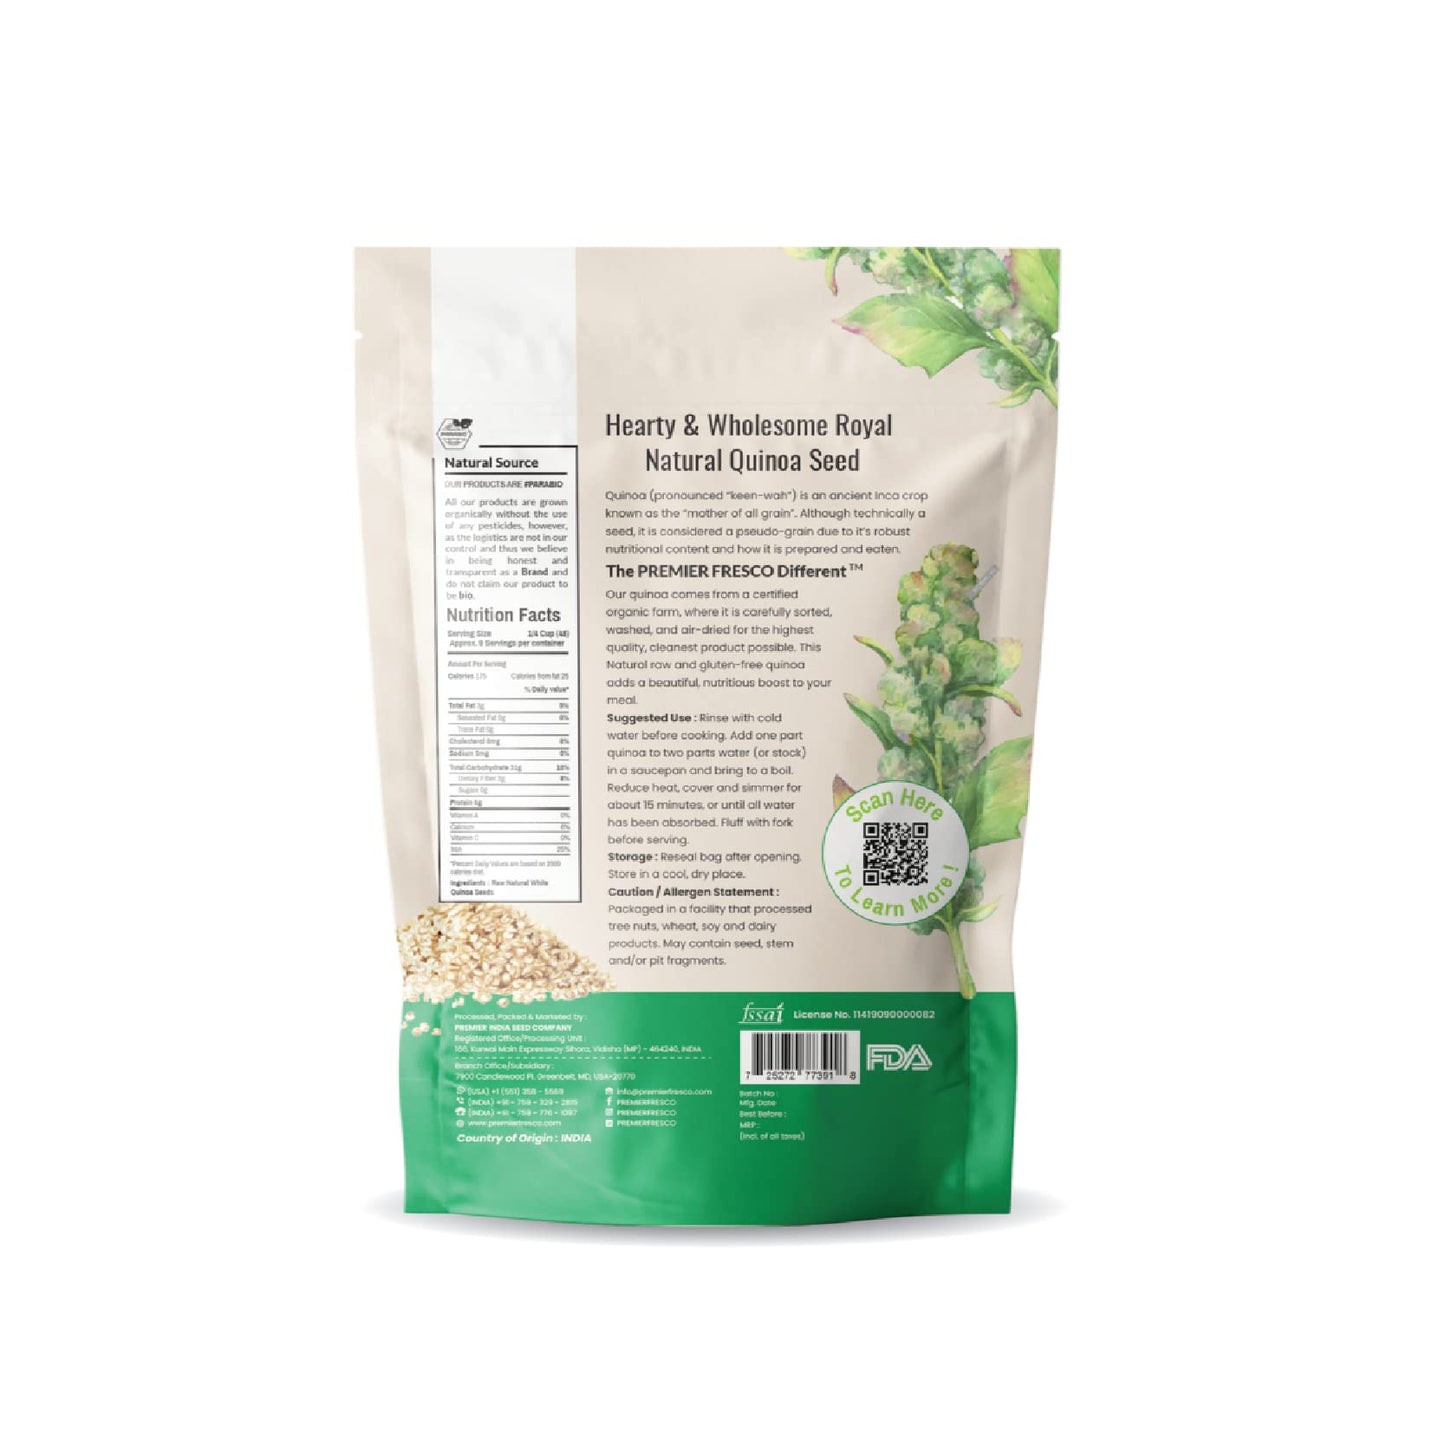 Premier Fresco | RAW NATURAL™- White Quinoa, Whole Grain | Pre-washed | Gluten-free | Plant Protein, Fiber | Organic Ancient Grain for Pasta and Rice Substitutes -450g (Pack of 1)